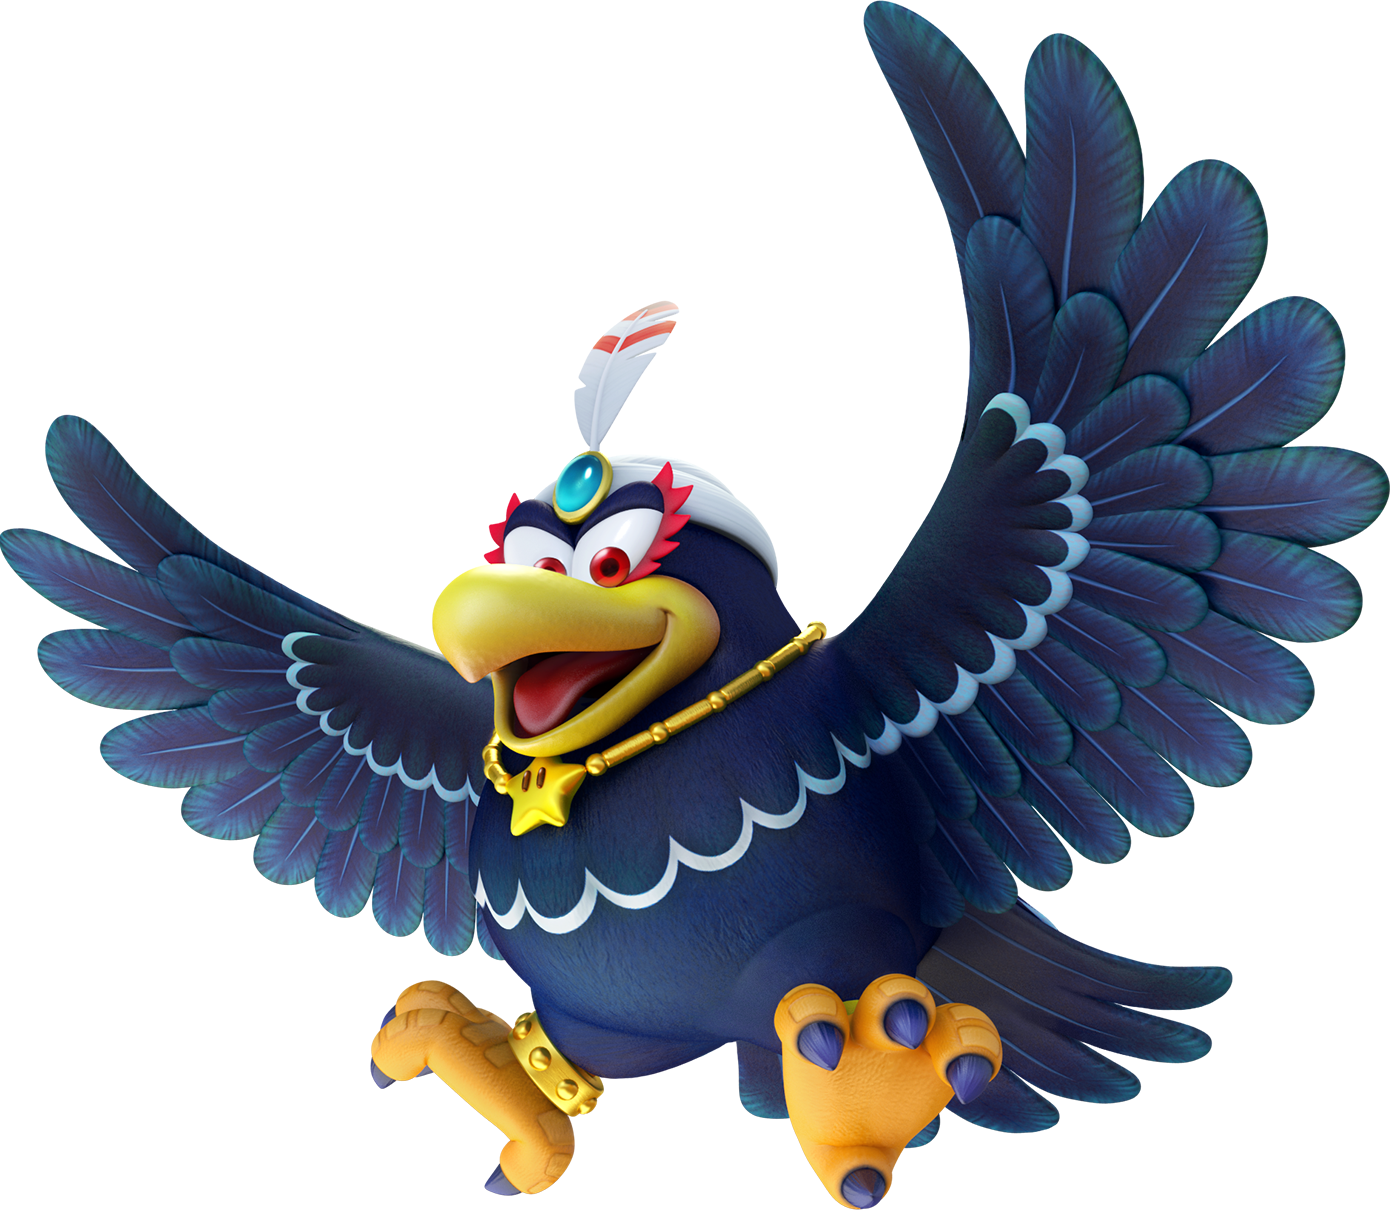 http://www.mariowiki.com/images/b/b4/Wingo_CTTT.png